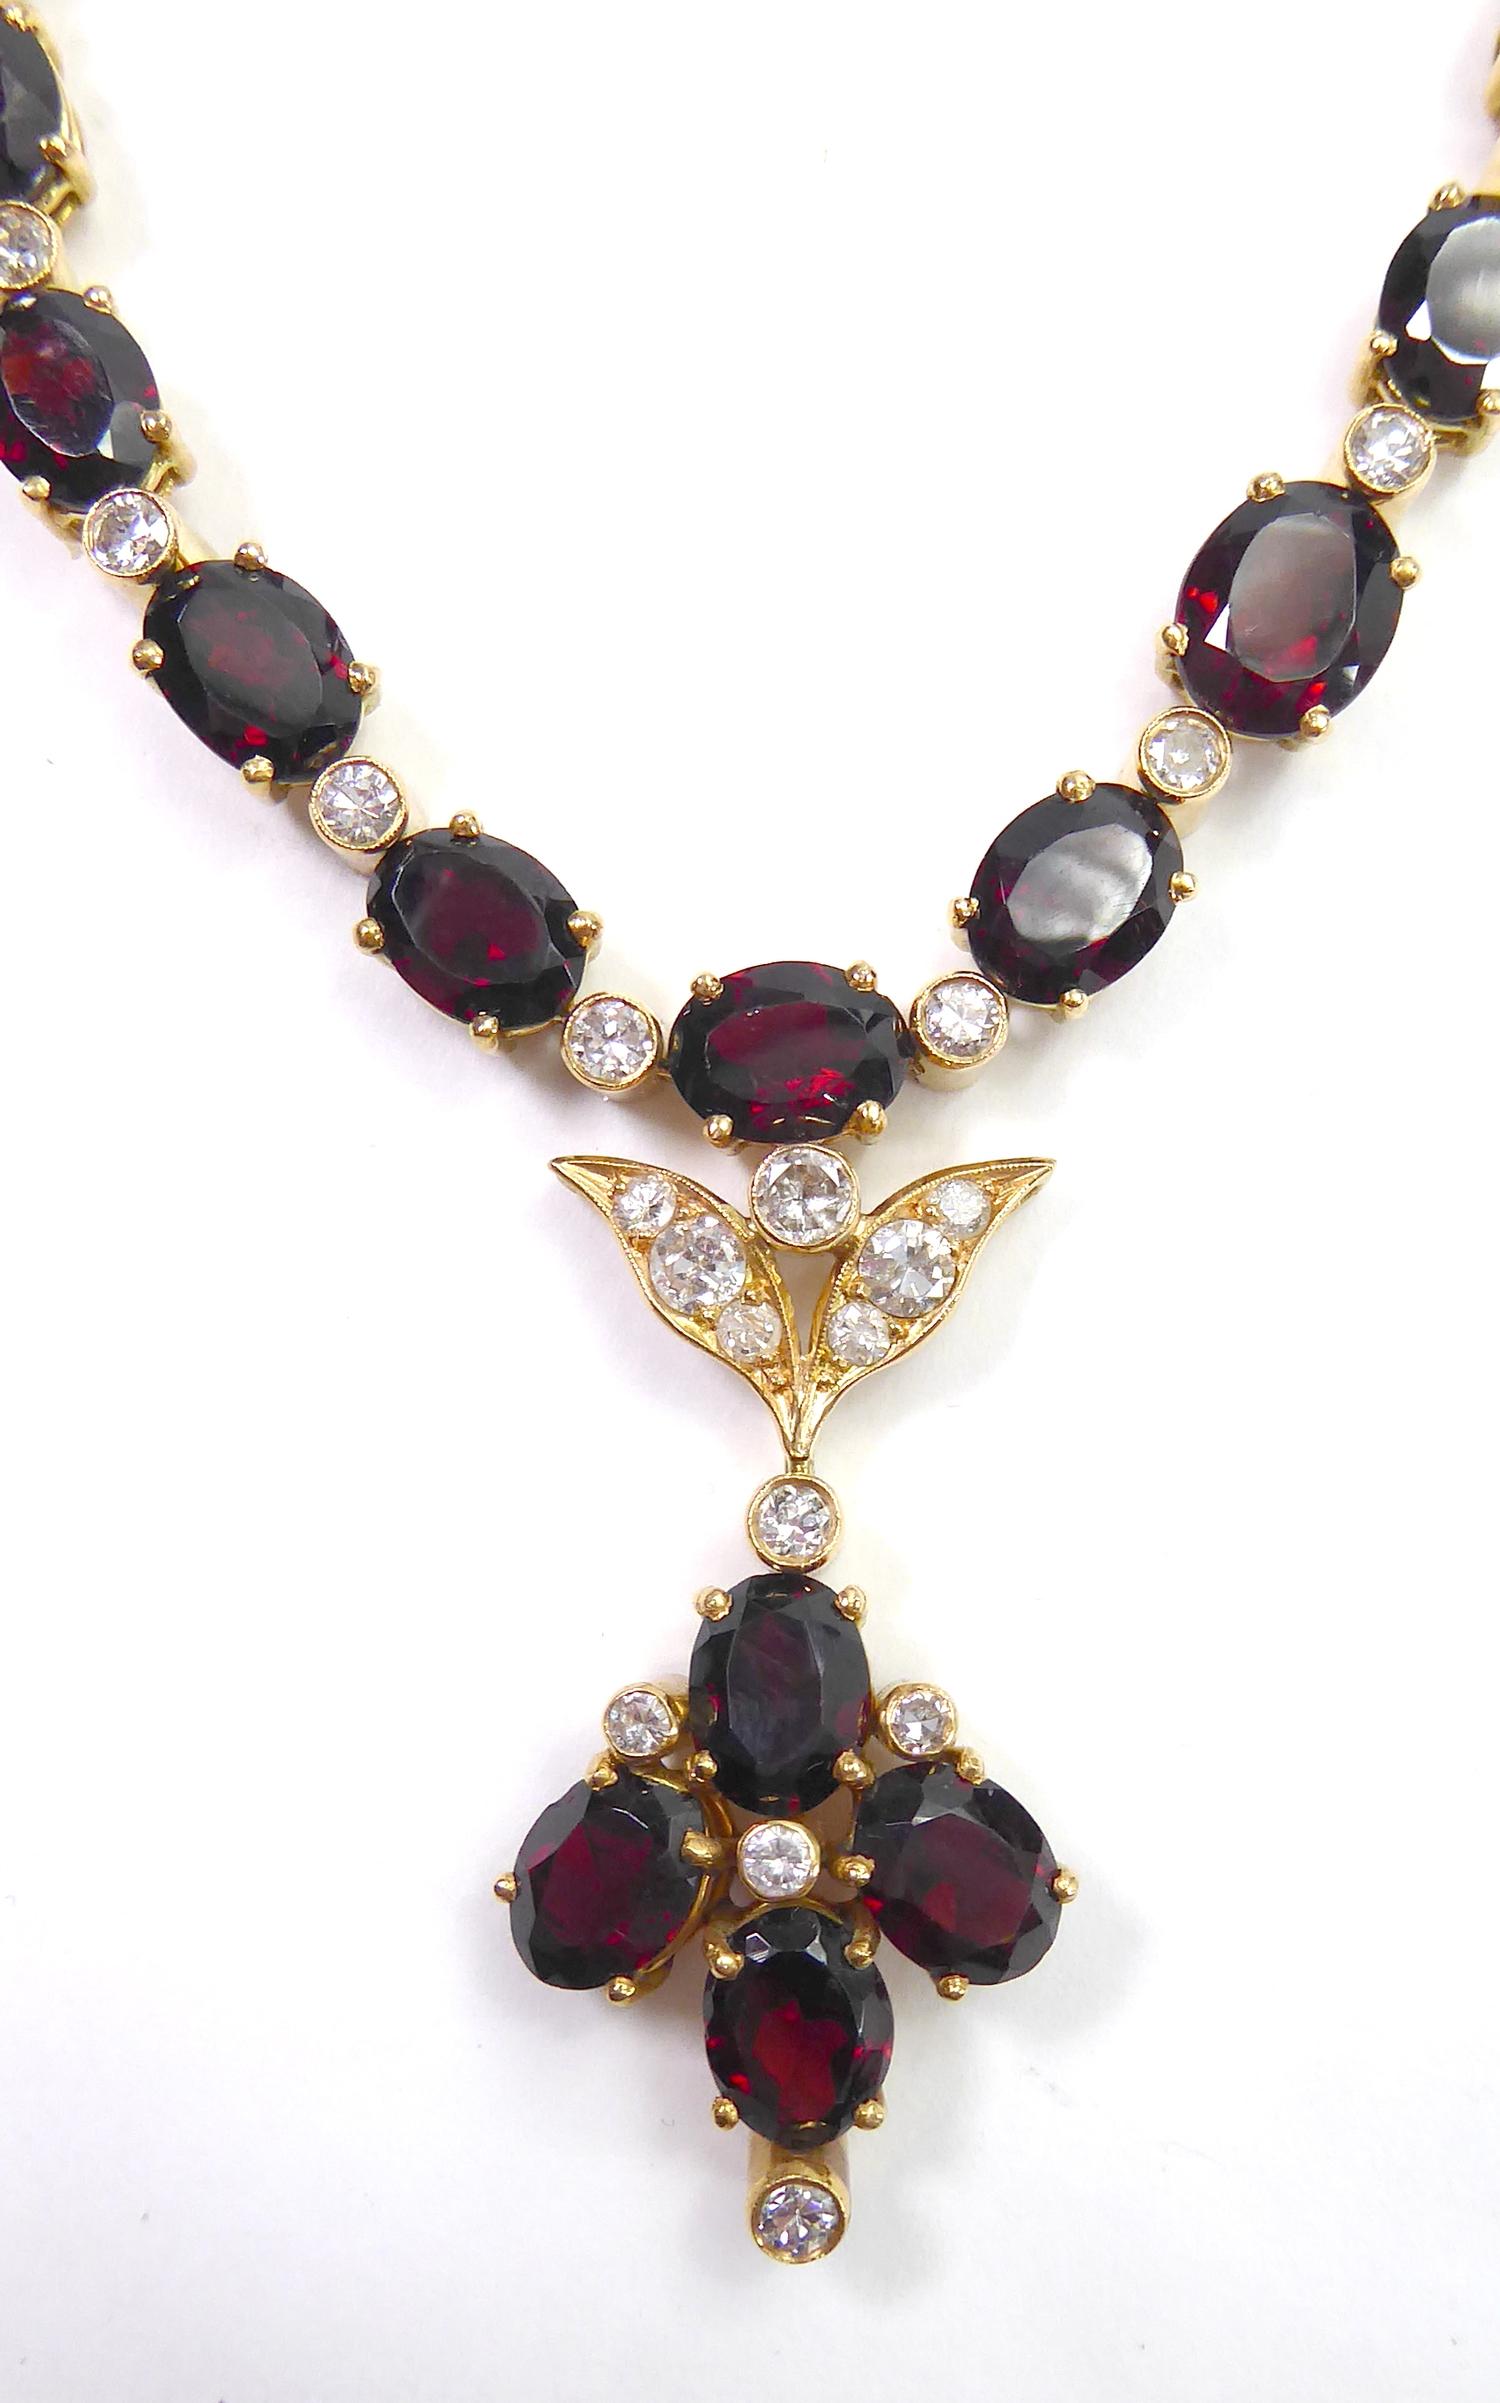 A GARNET AND DIAMOND ENCRUSTED NECKLACE AND MATCHING EARRINGS. (61.6g) - Image 19 of 23